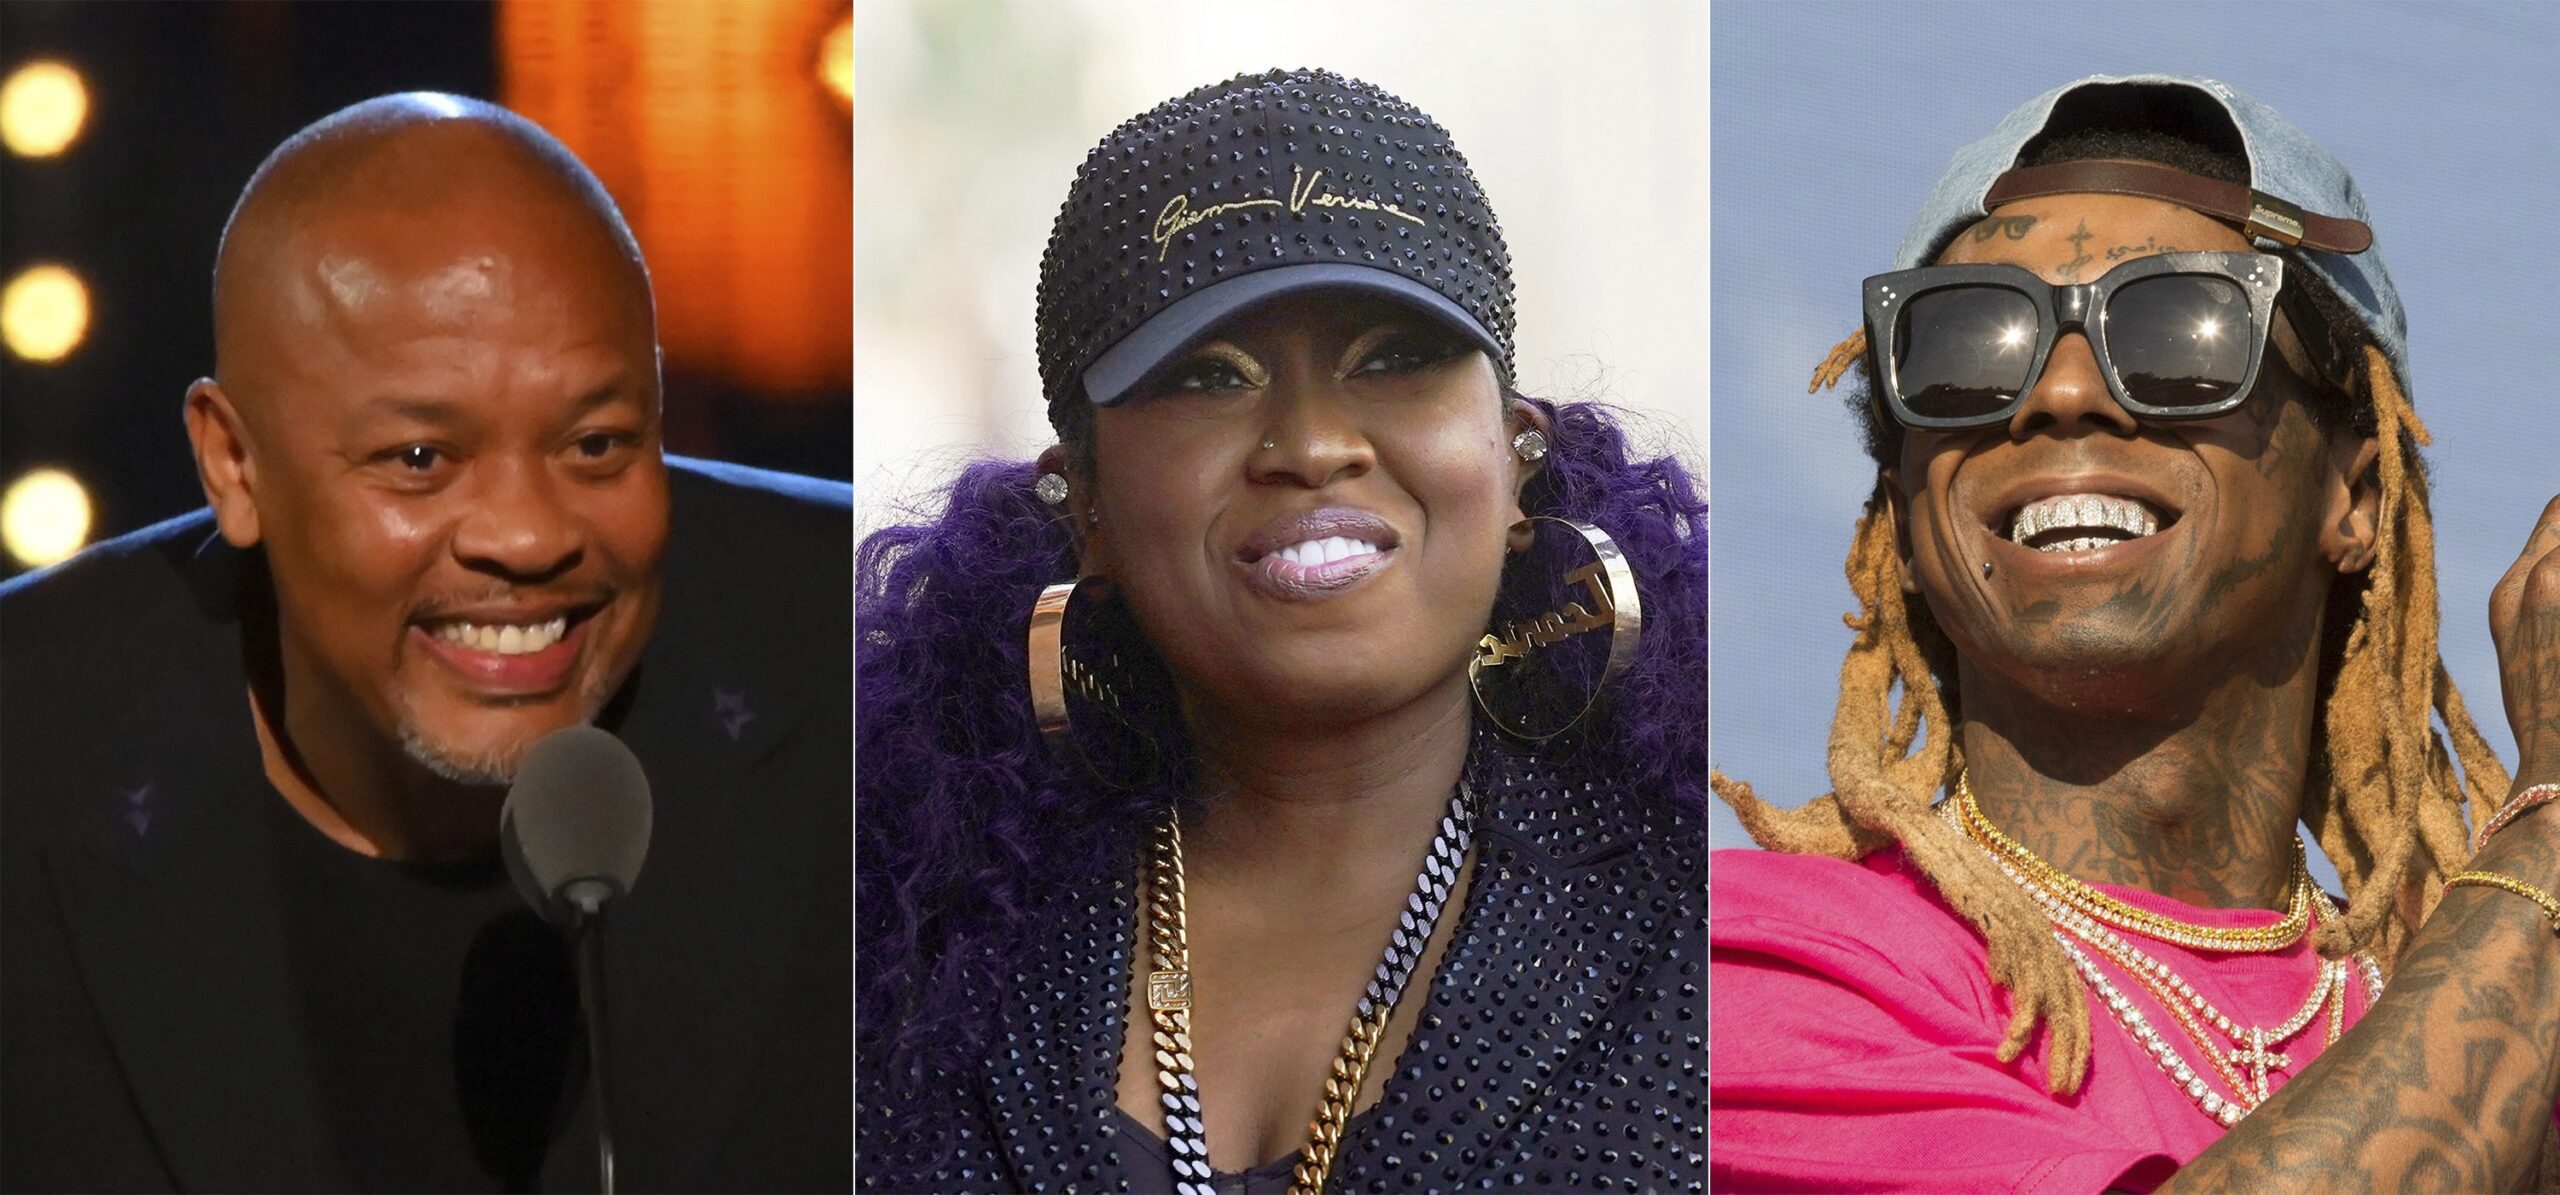 This combination of photos show Dr. Dre, from left, Missy Elliott and Lil Wayne who will be honored at the Recording Academy’s second annual Black Music Collective event during Grammy week next month. The academy announced Wednesday that the three Grammy winners along with music executive Sylvia Rhone will receive the Global Impact Award for their personal achievement in the music industry.  (AP Photo)